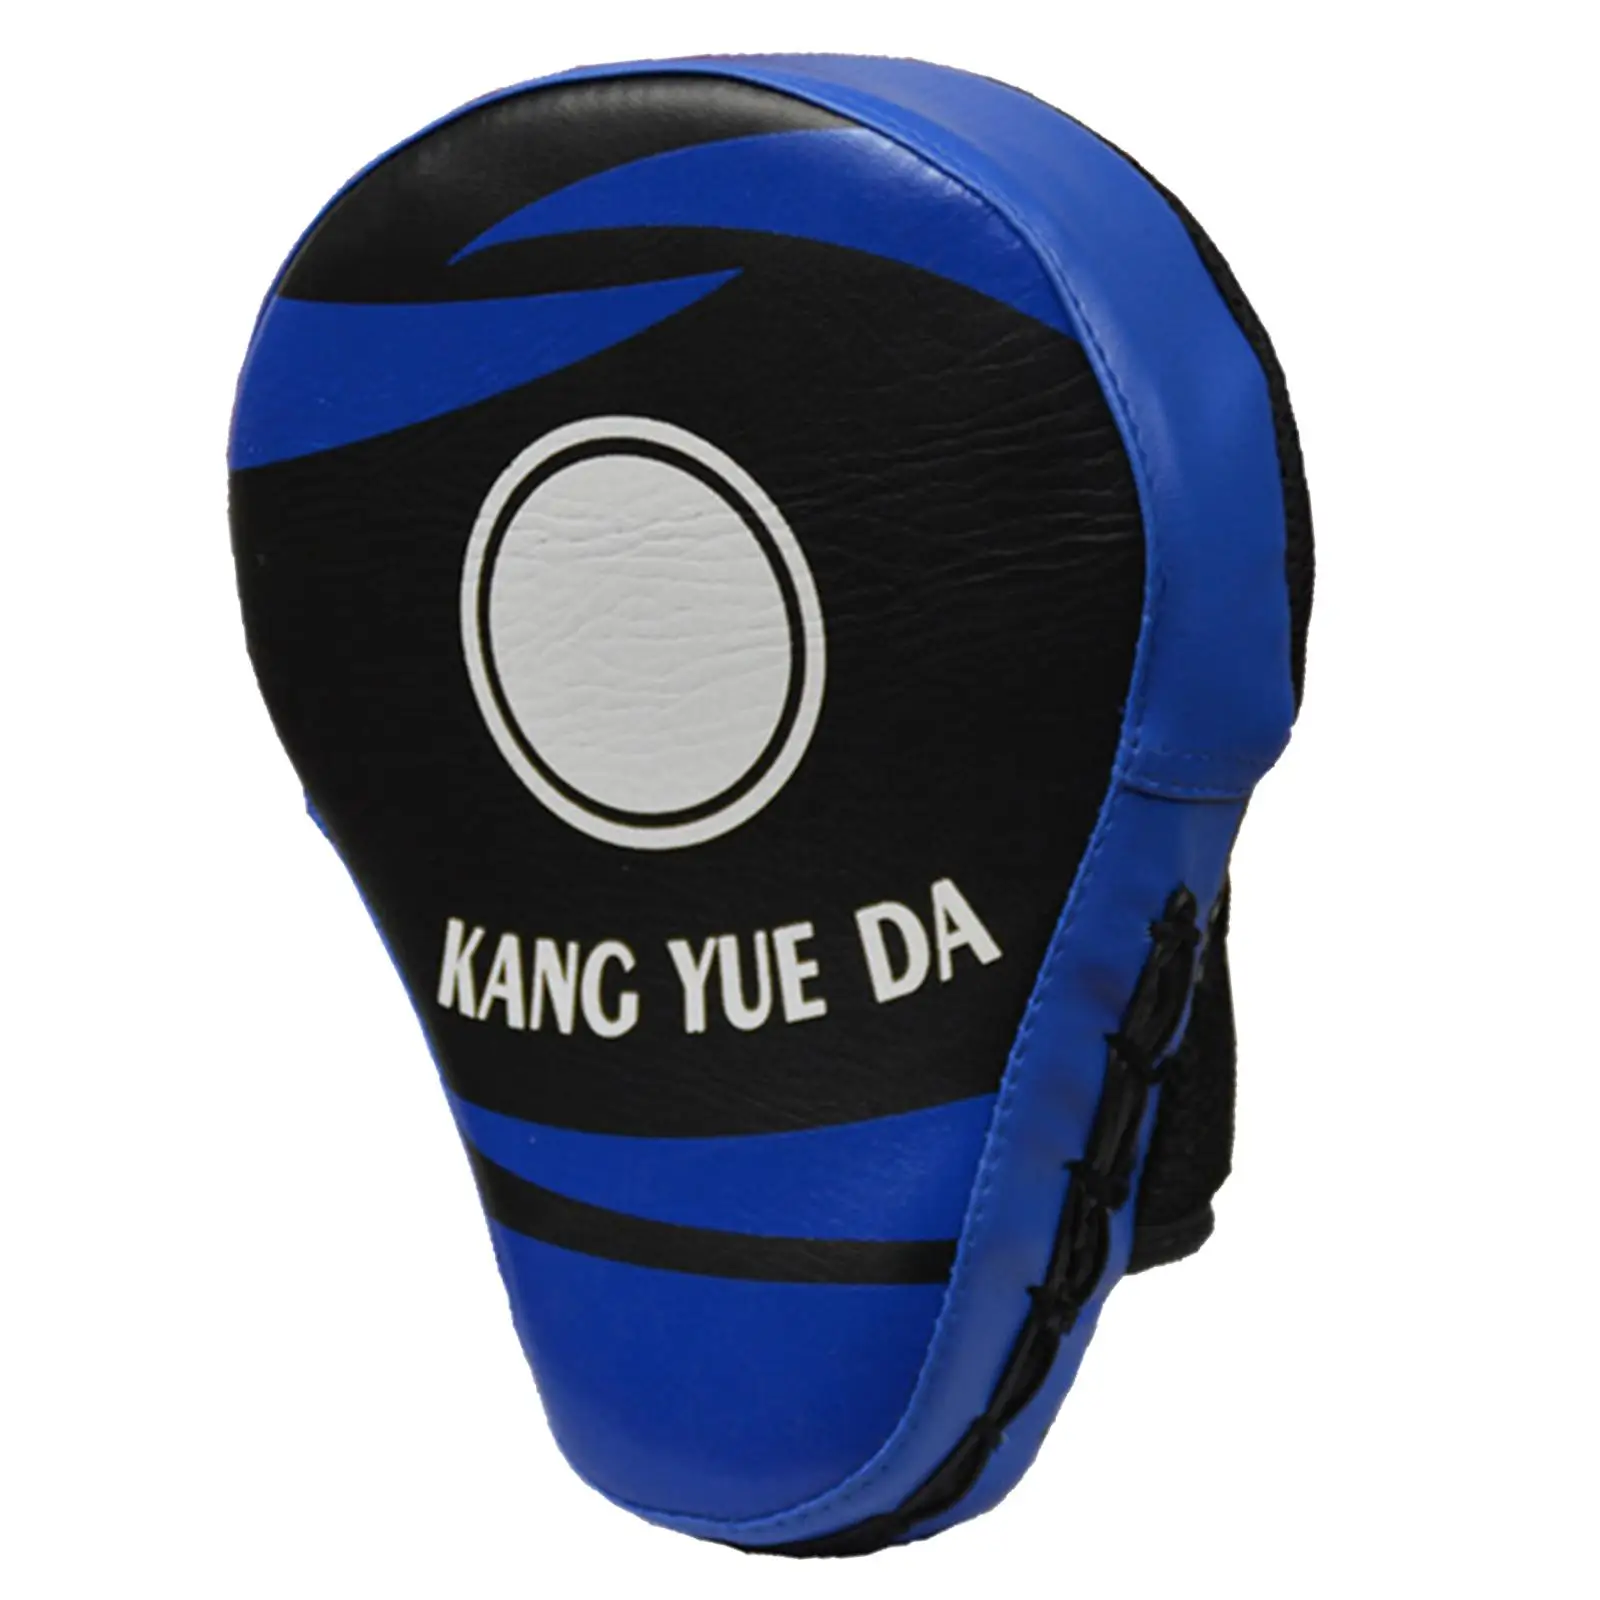 PU Leather Boxing Pads Curved Focus Mitts, Focus Pads Hand Pad Training Shield